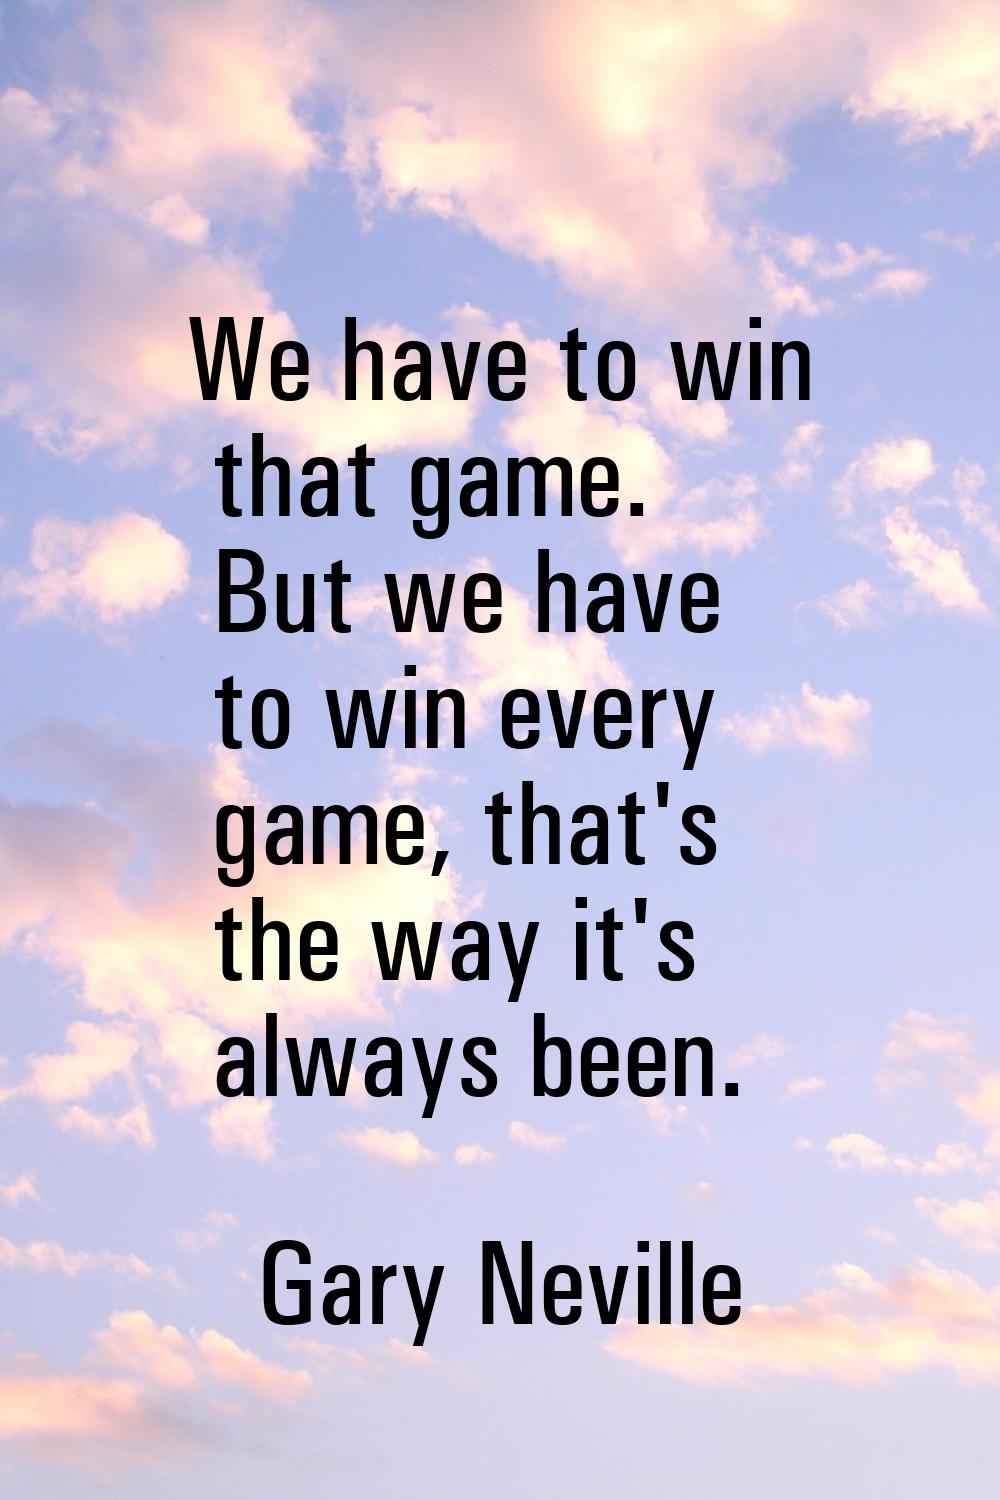 We have to win that game. But we have to win every game, that's the way it's always been.